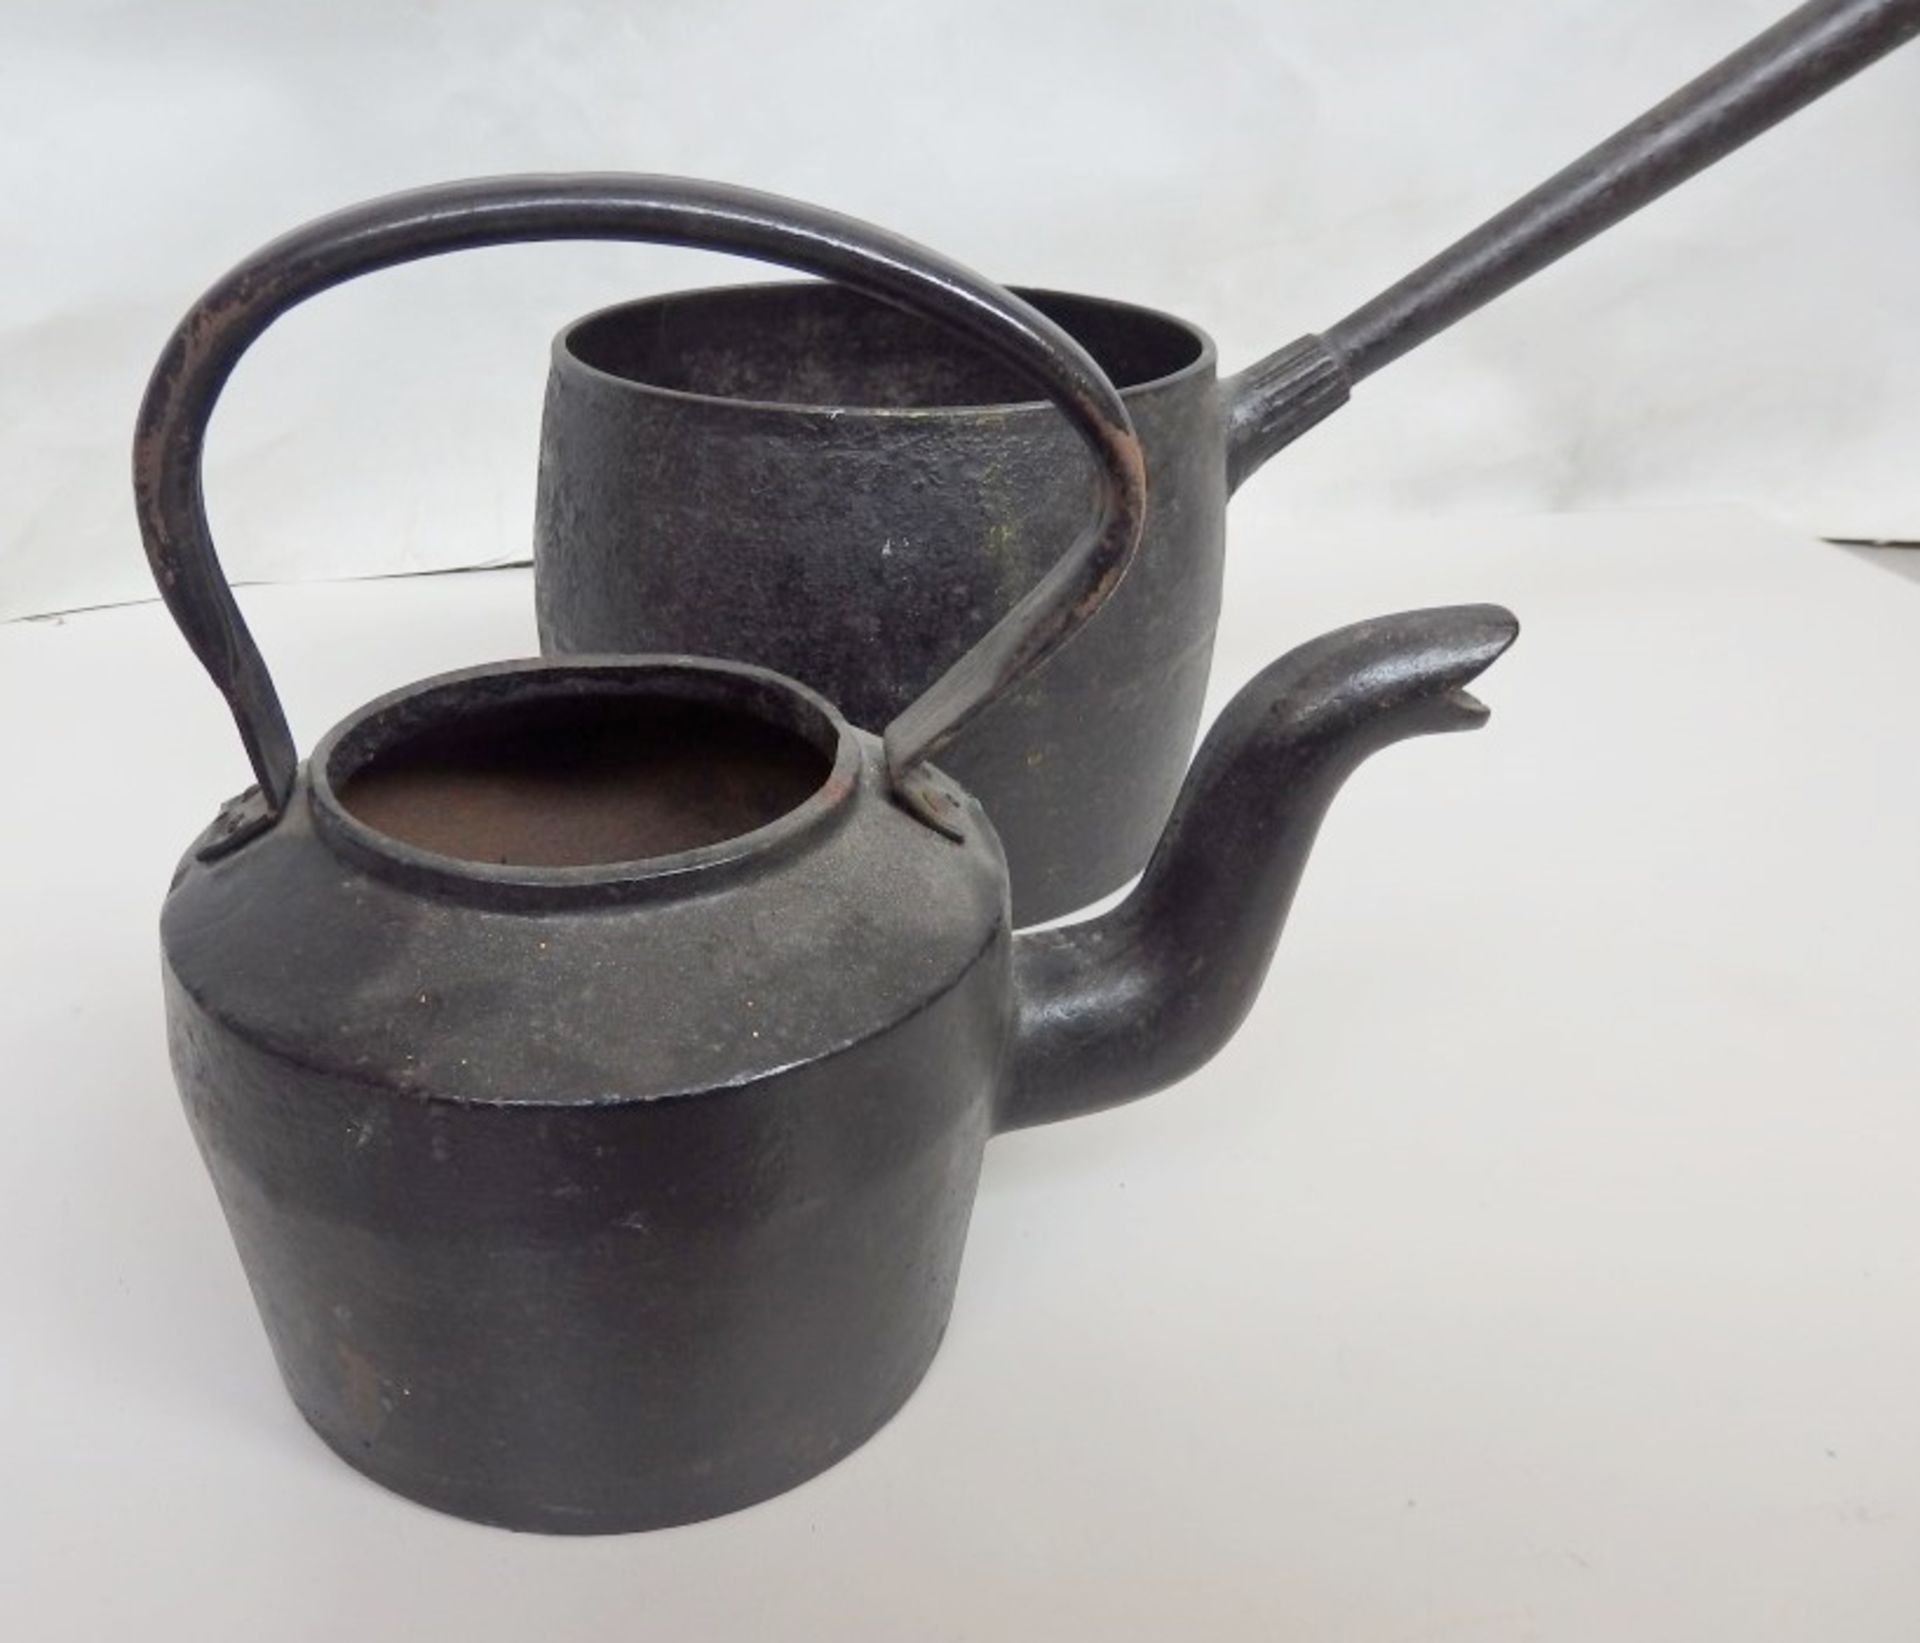 2 x Items Or Antique Kitchenware - Includes Kettle & Long-armed Pan - Both Very Heavy, Sturdy